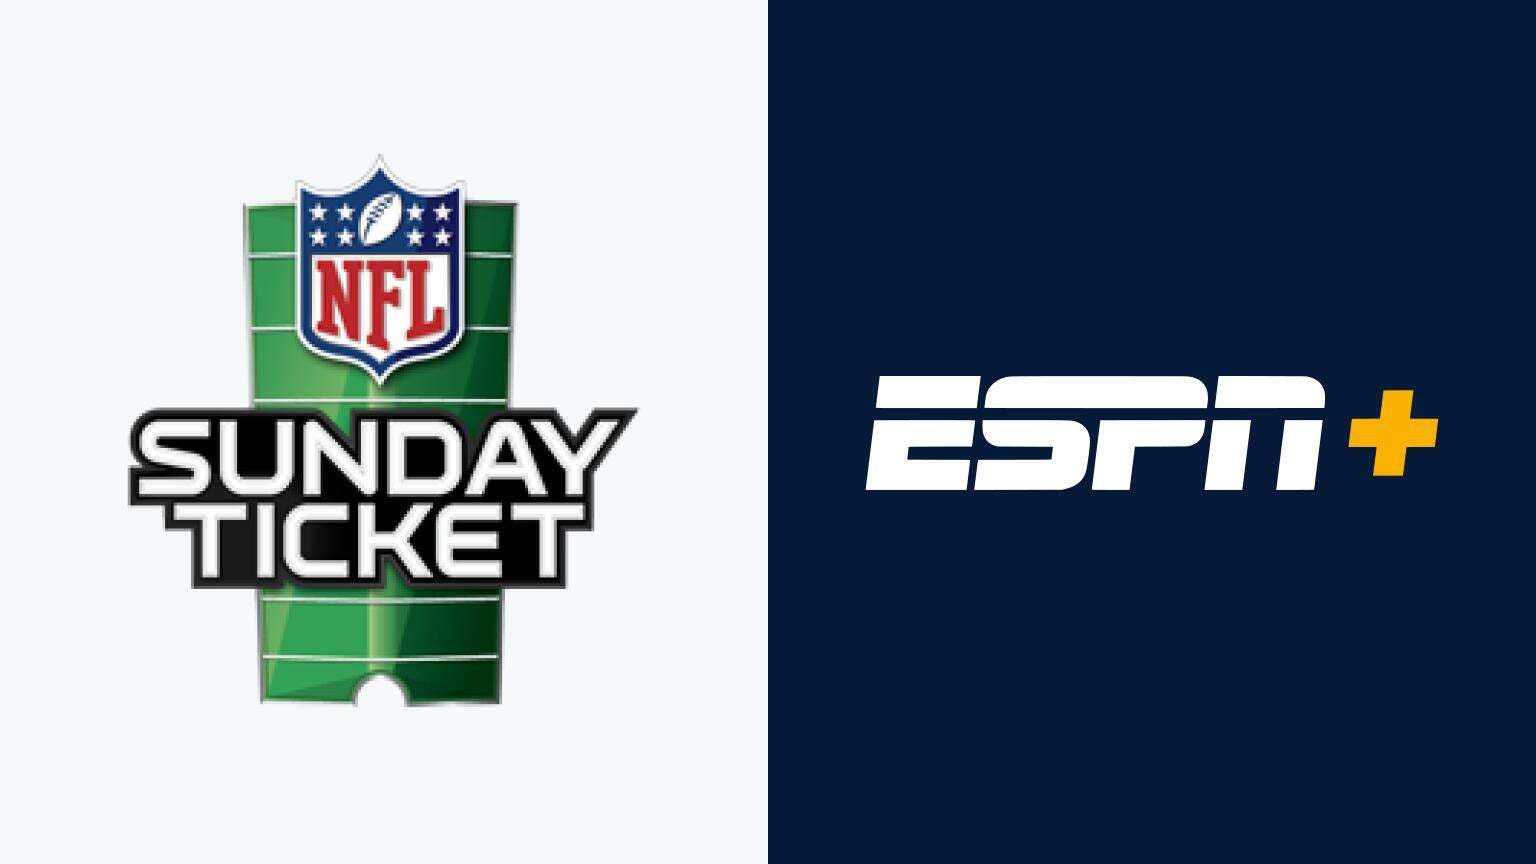 Disney CEO Says Company is 'In Discussions' to Add NFL Sunday Ticket on